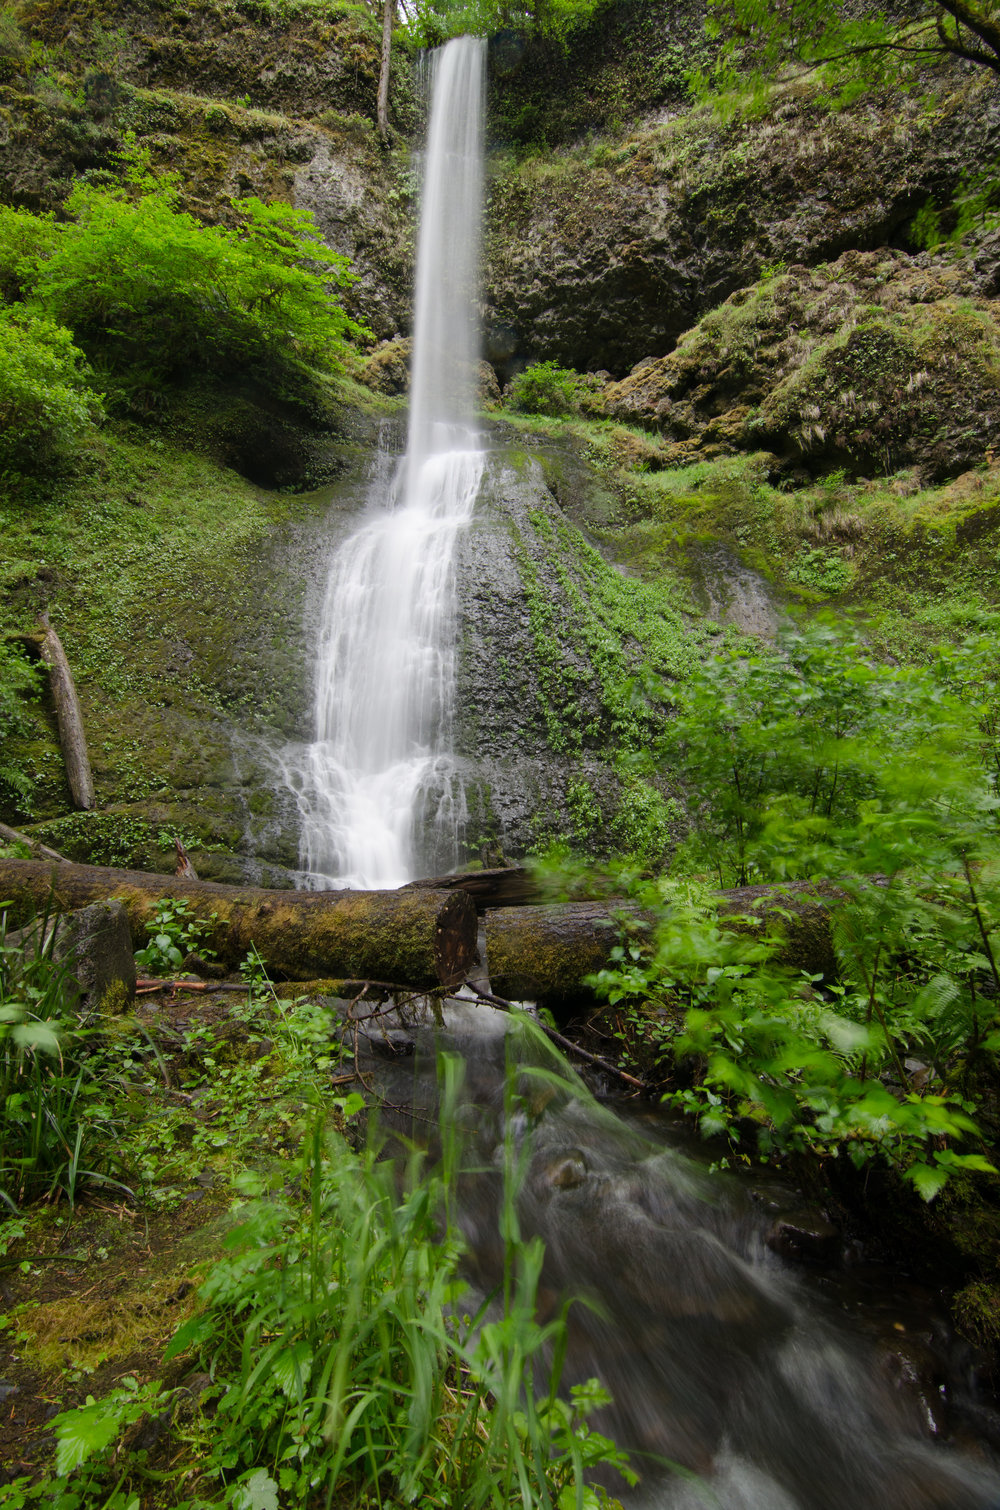  A waterfall at Silver Falls state park. 